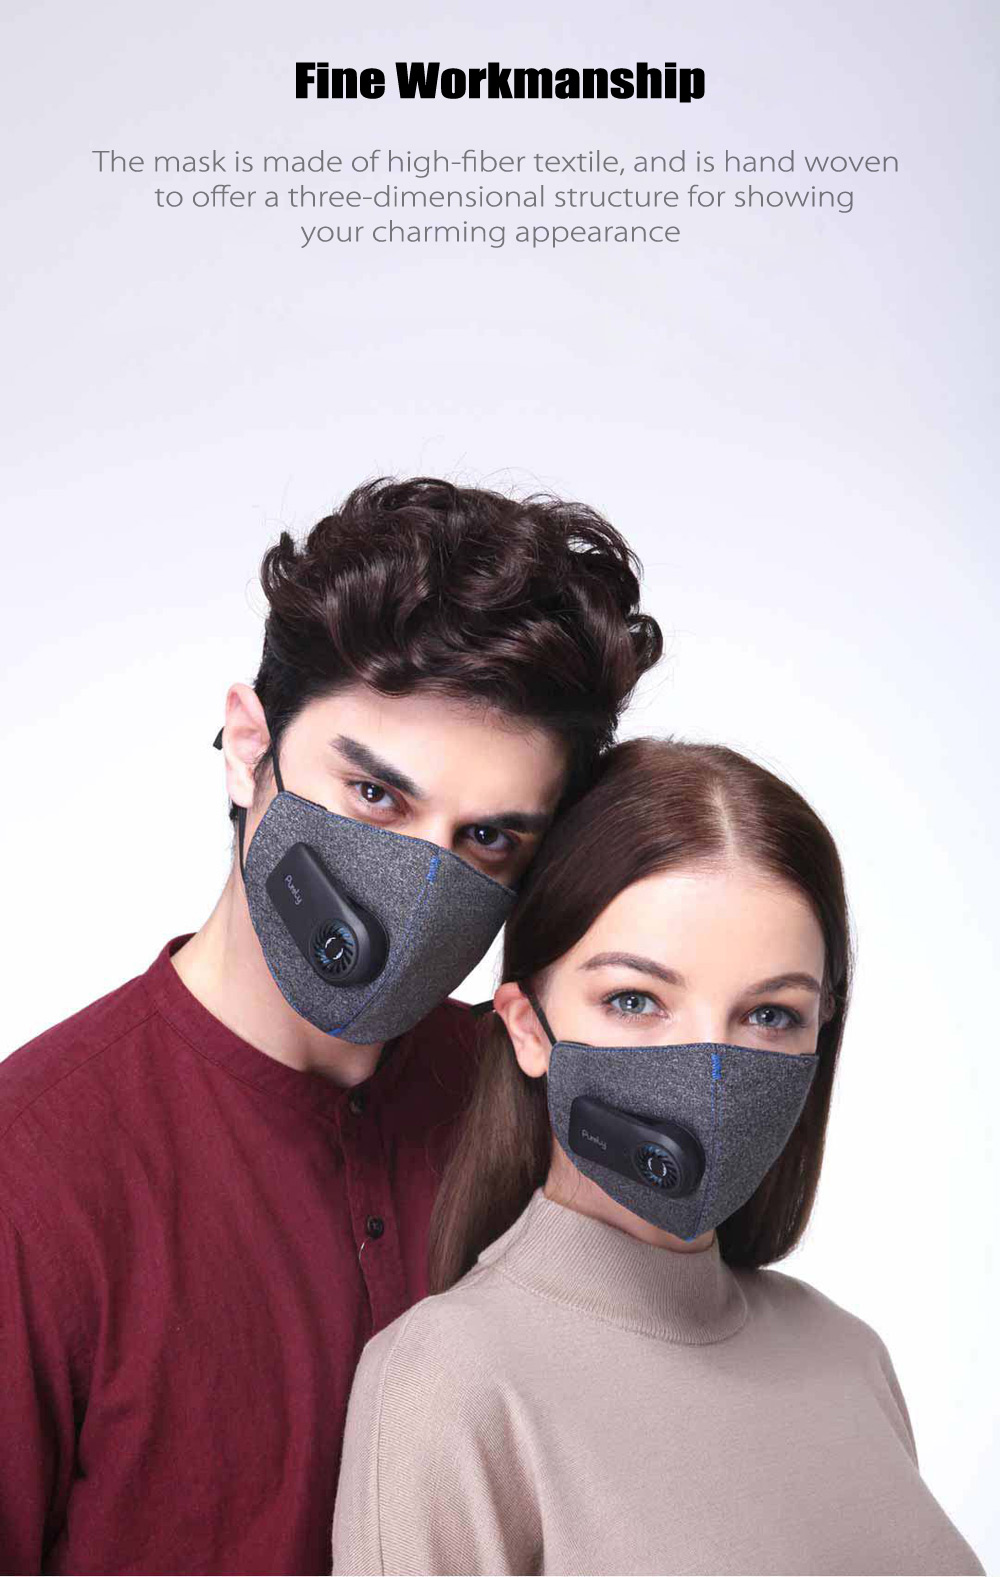 Xiaomi Purely KN95 Anti-Pollution Air Mask with PM2.5 550mAh Battreies Rechargeable Filter